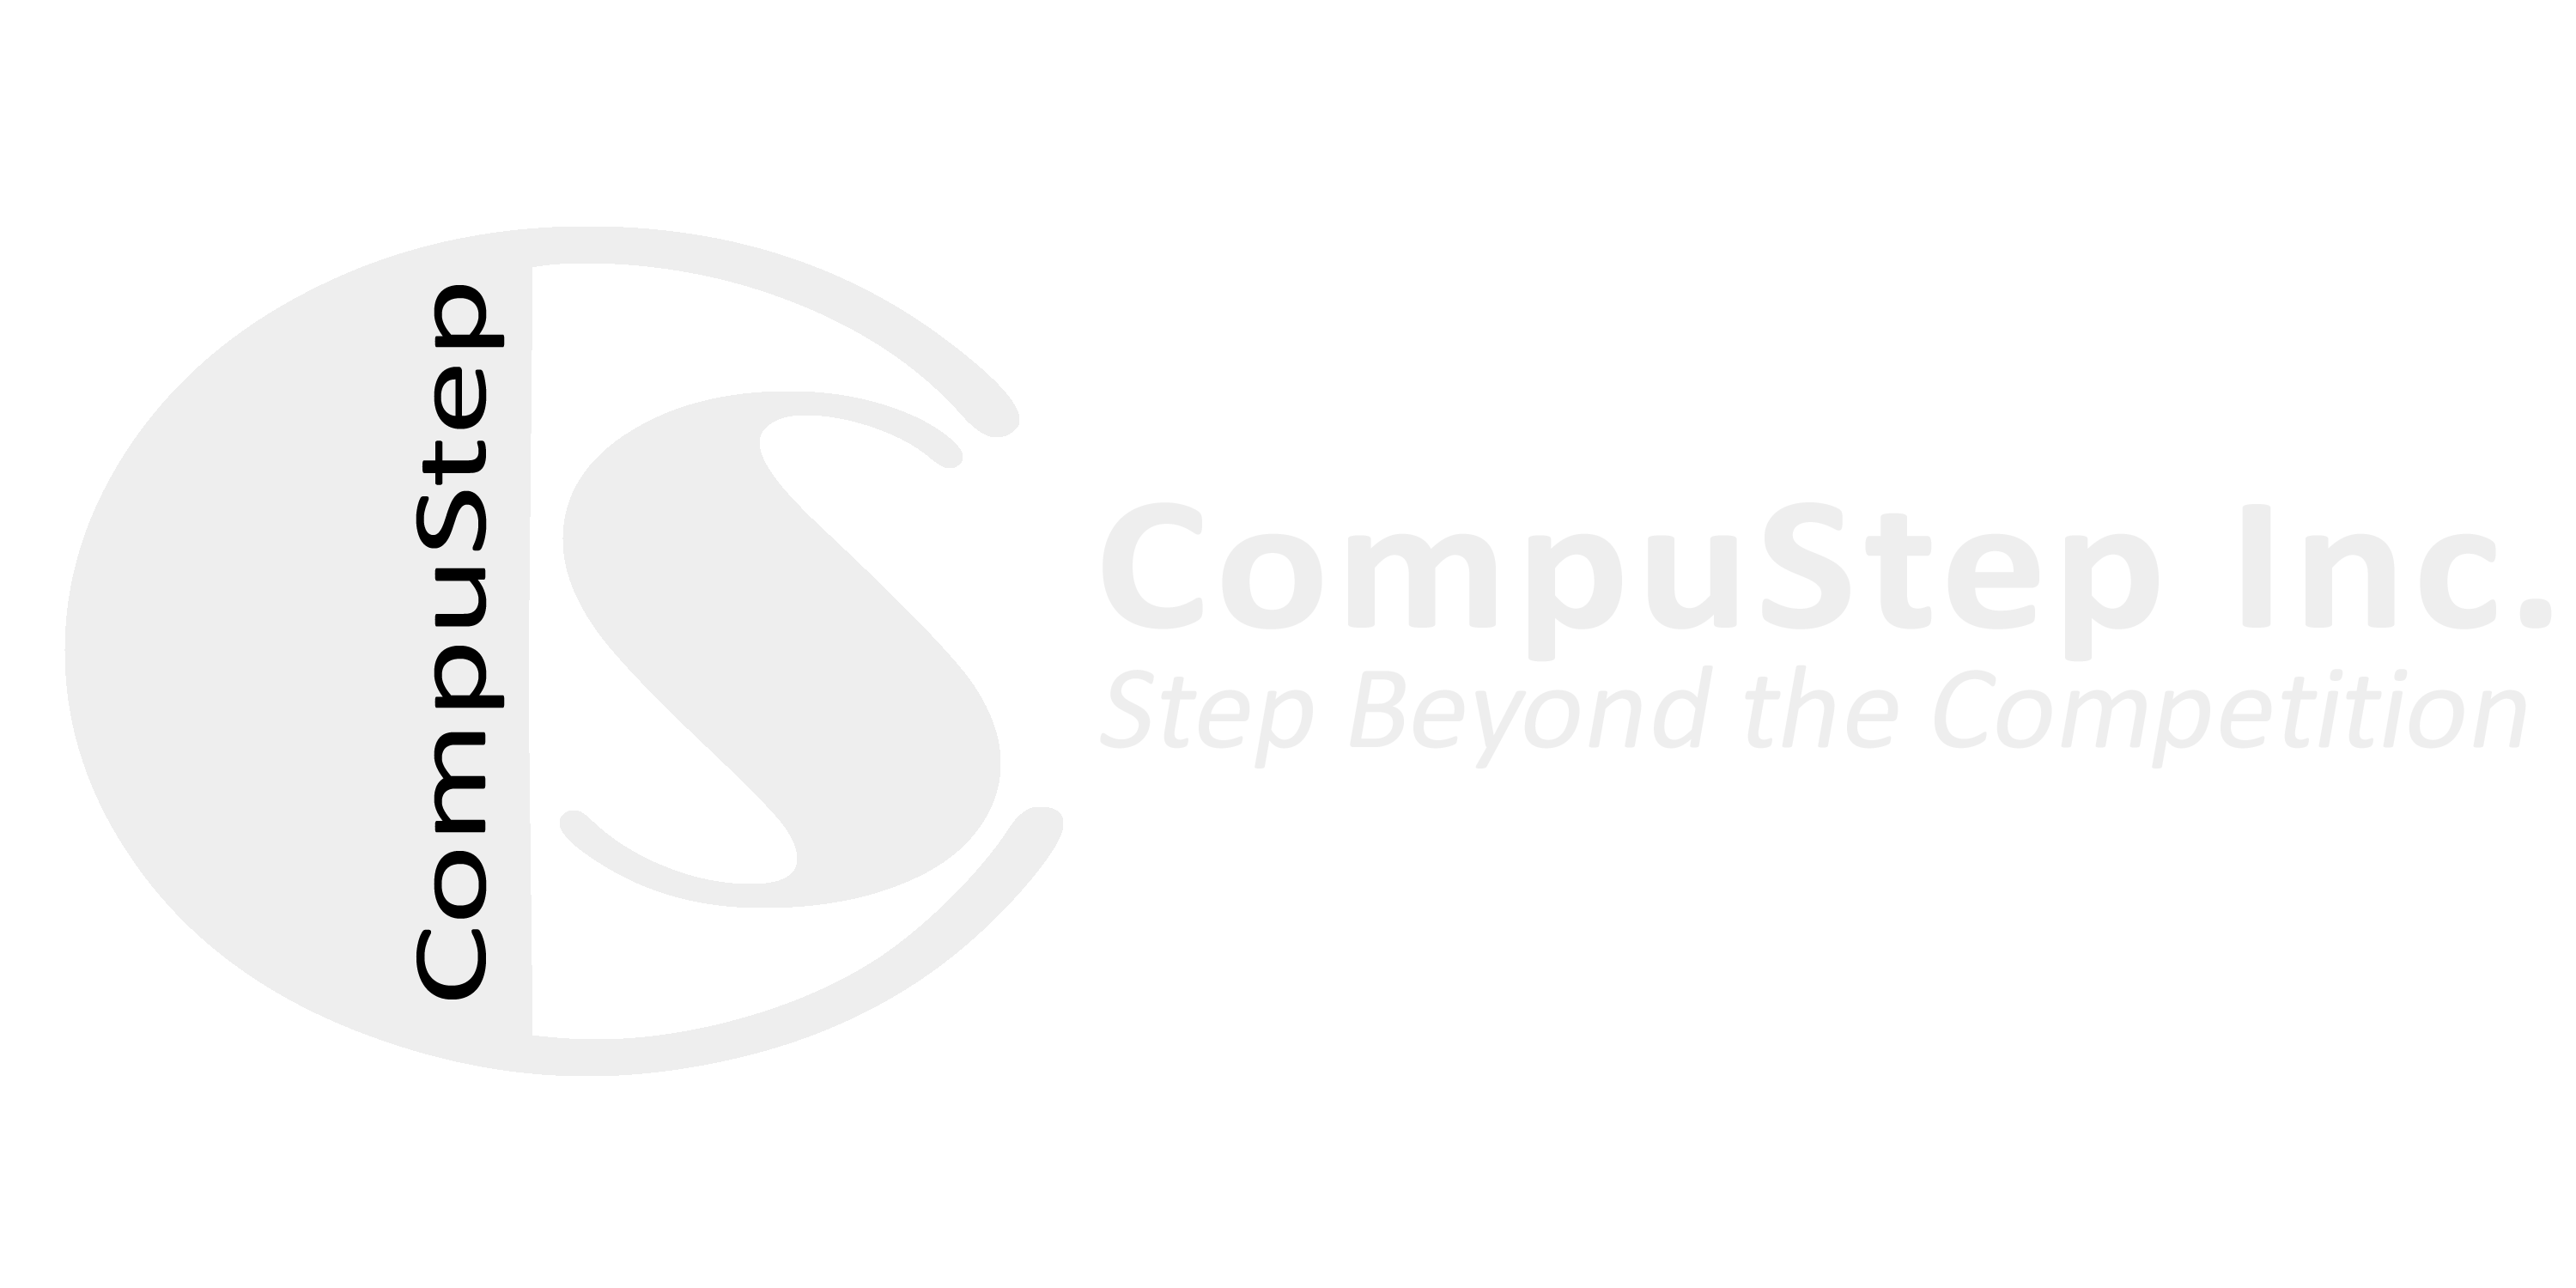 CompuStep Inc. Step beyond the Competition